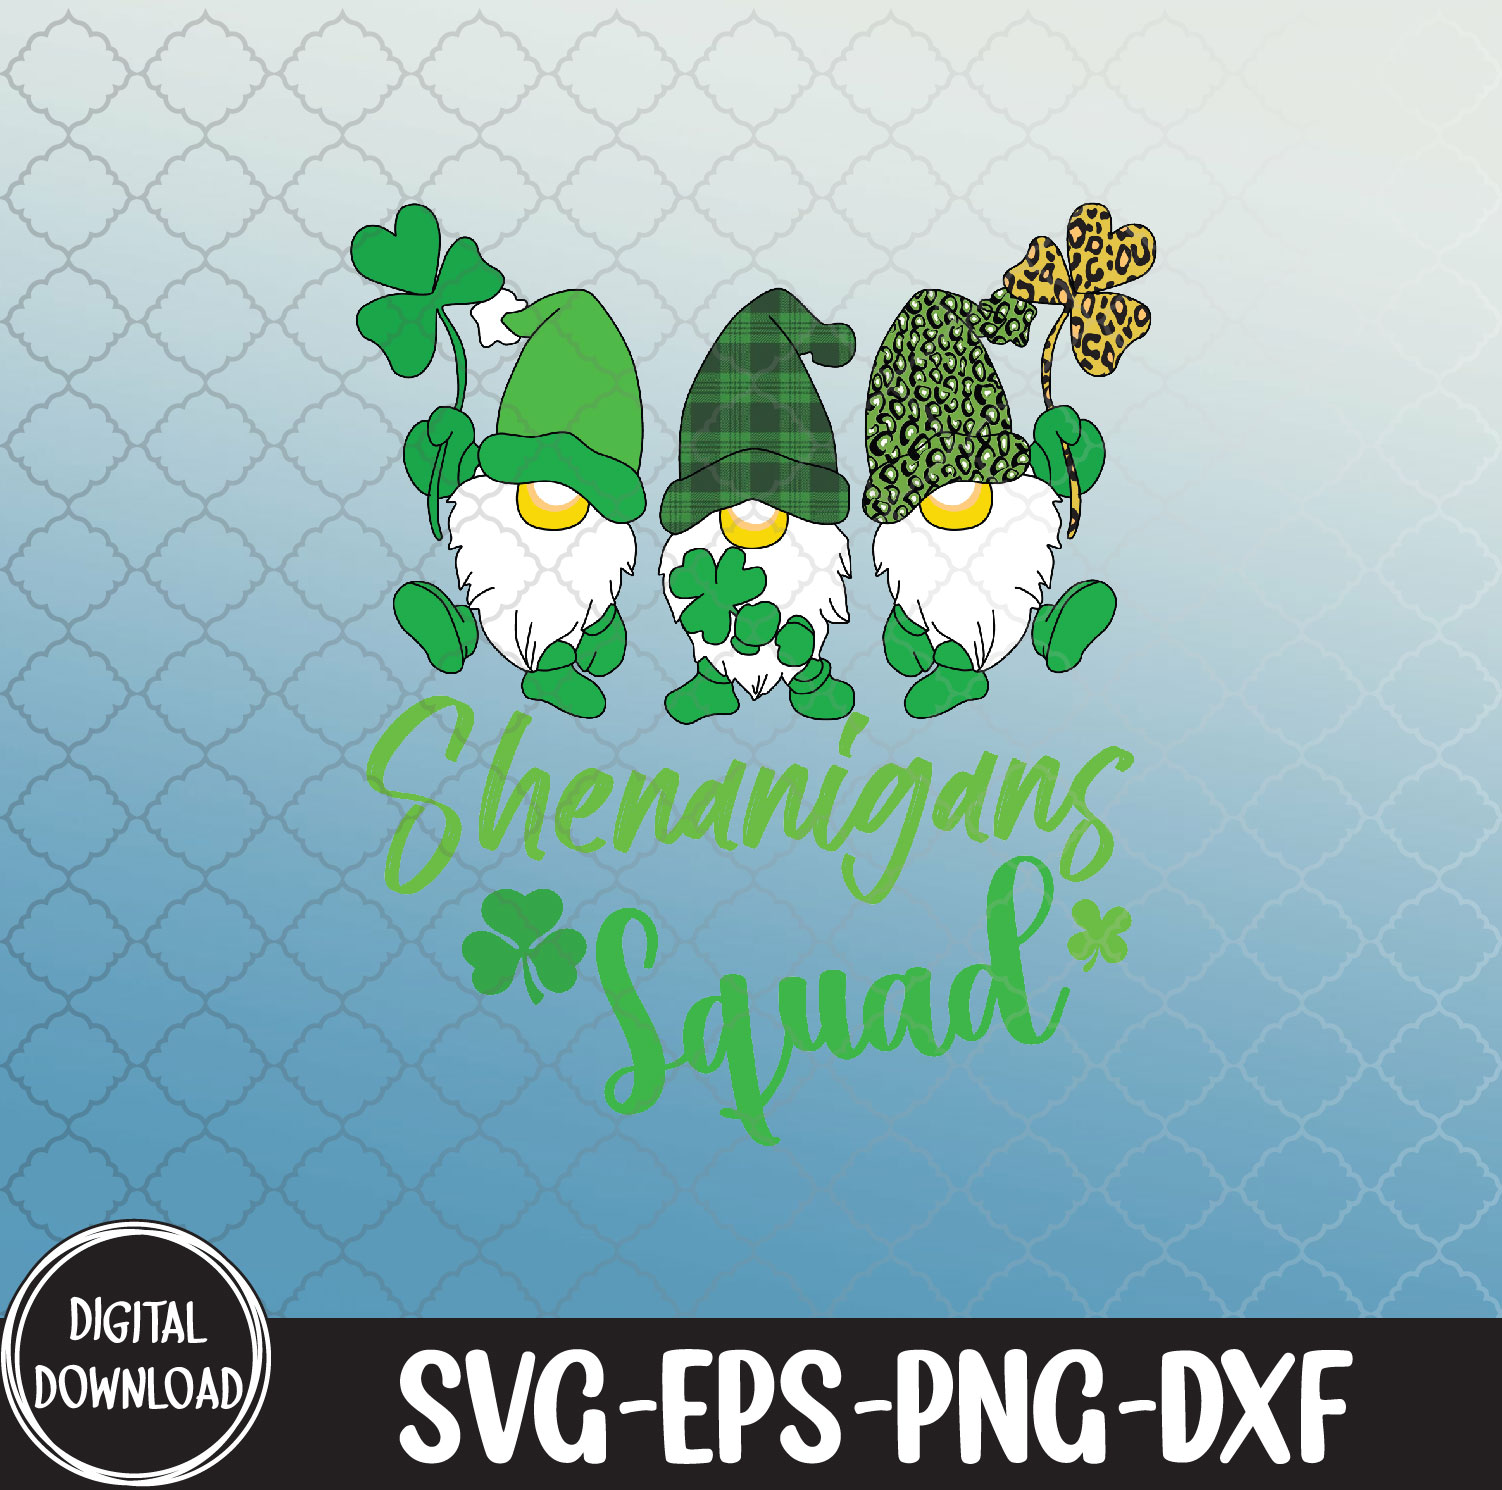 WTMNEW9file 09 56 Time For Shenanigans Squad St Patricks Day, Shenanigans svg, St Patricks Day svg